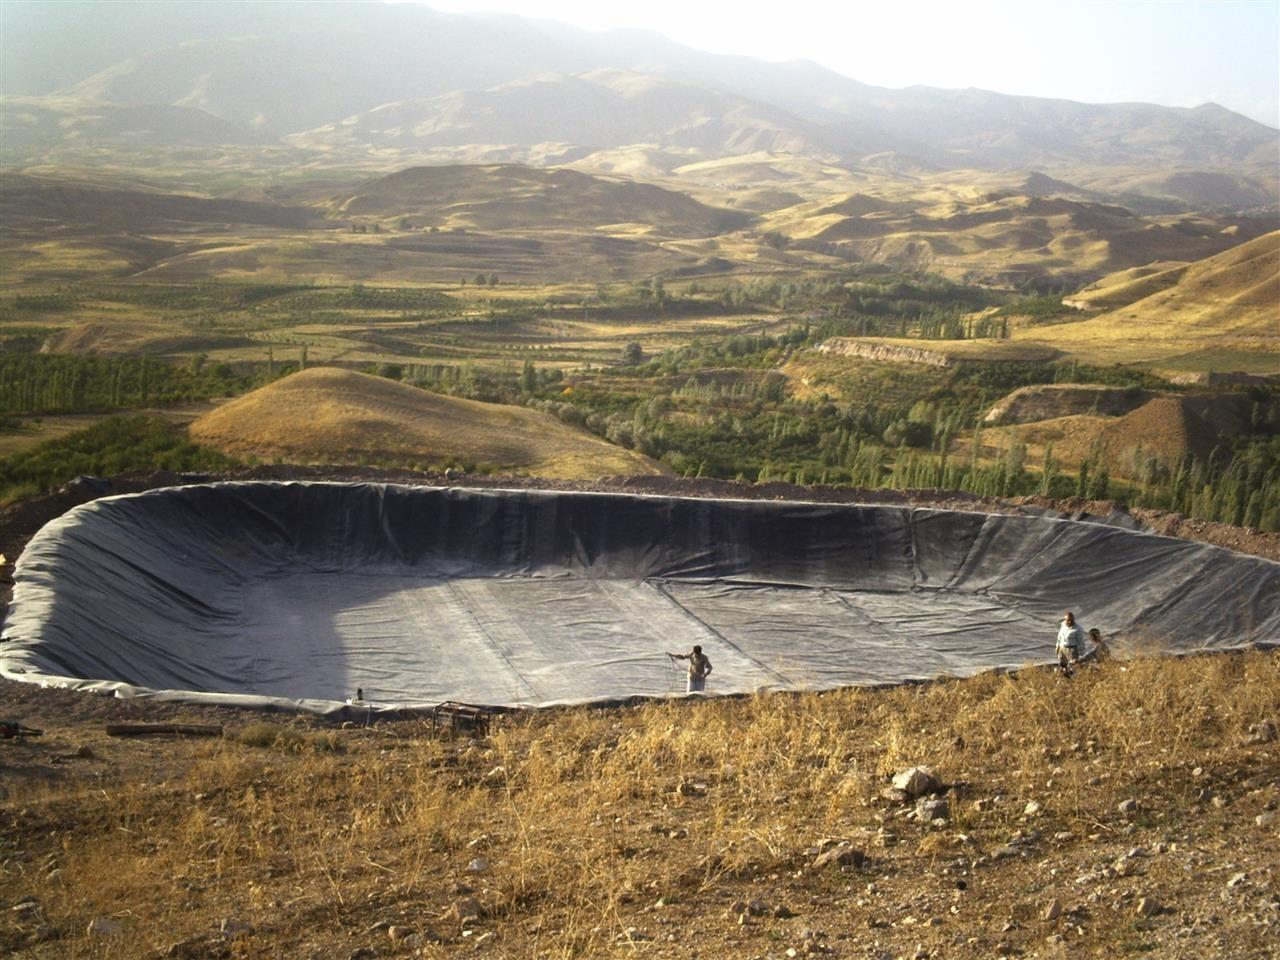 Construction of agricultural water storage ponds